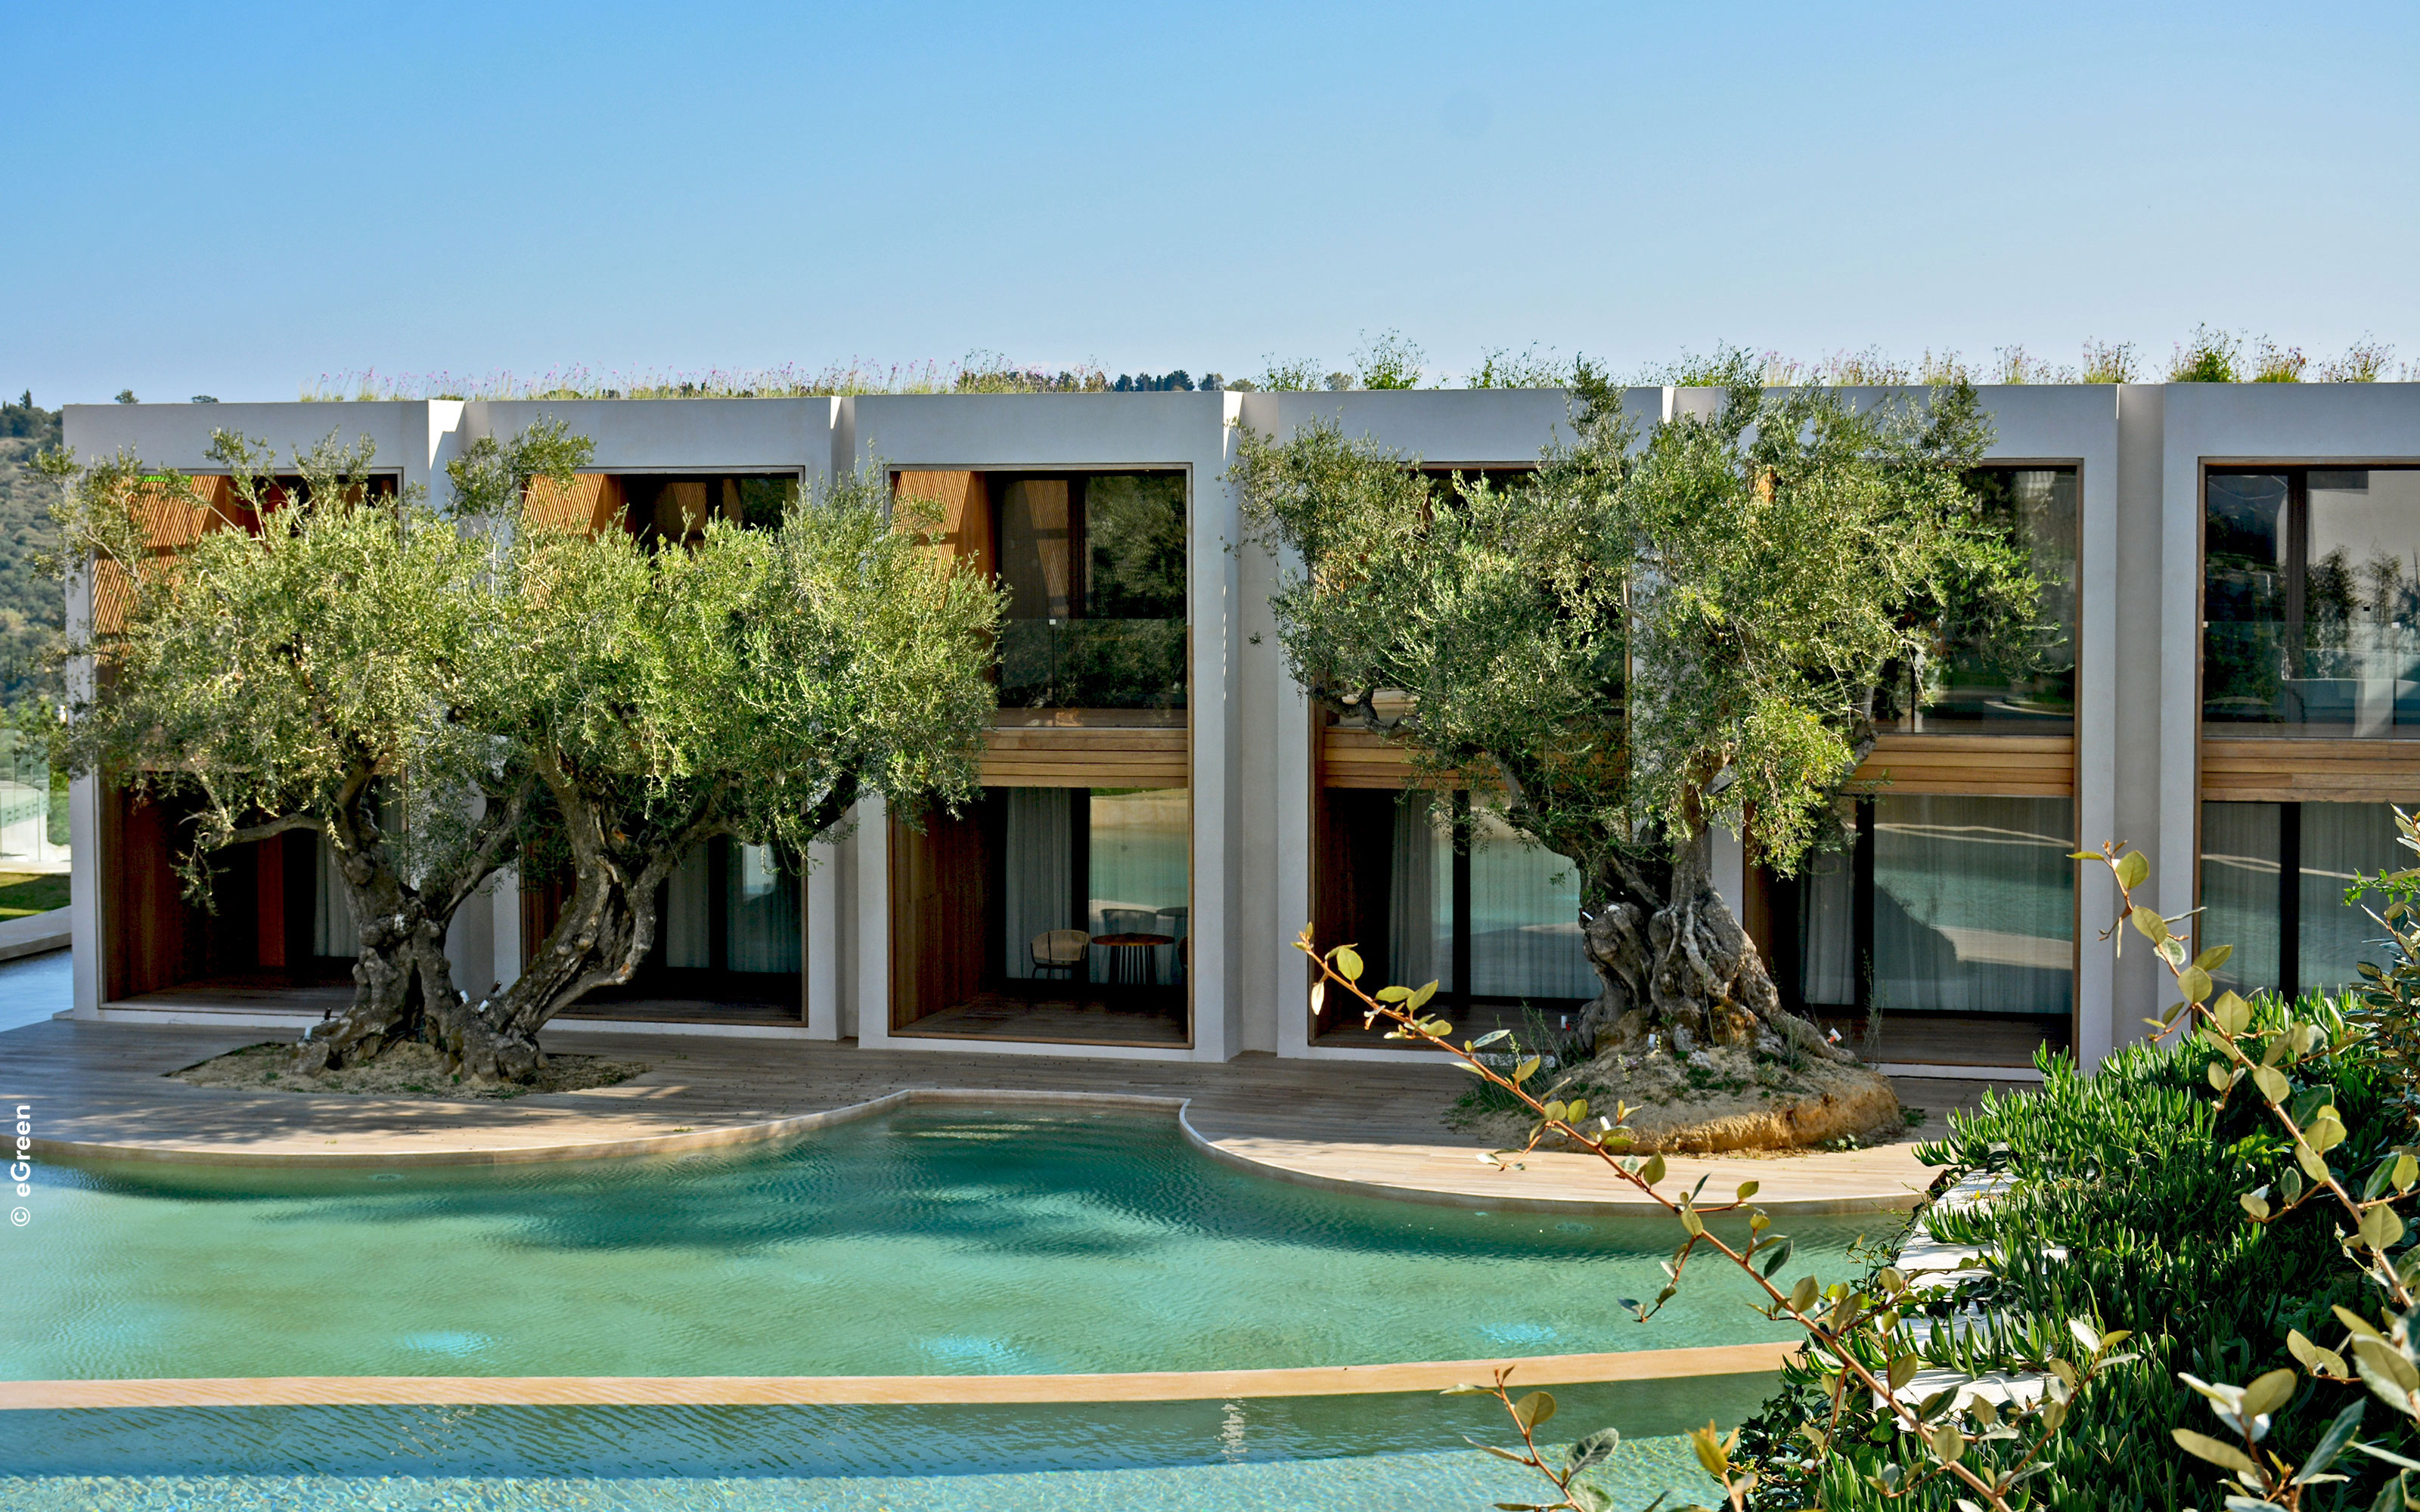 Hotel complex with water basins and olive trees